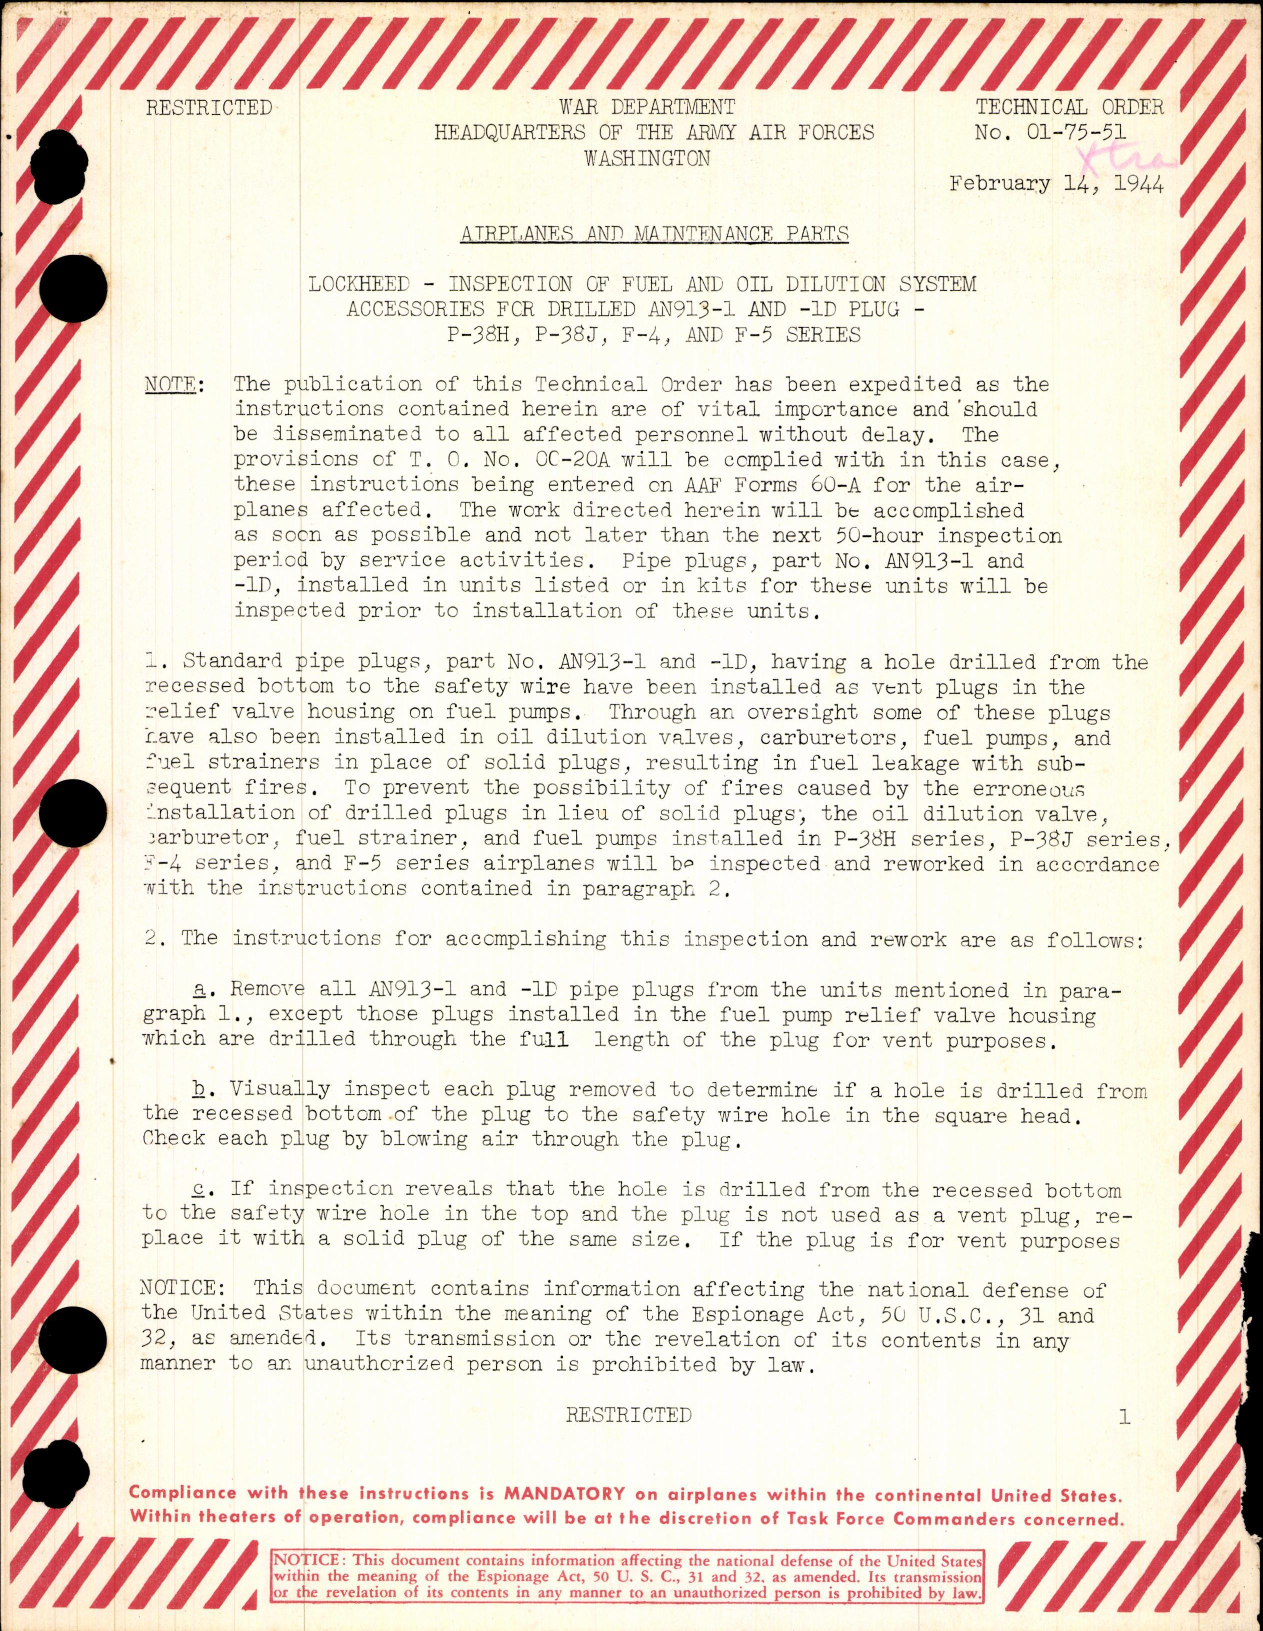 Sample page 1 from AirCorps Library document: Inspection of Fuel and Oil Dilution System Accessories for Drilled AN913-1 and -1D Plug for P-38H, J, F-4, and F-5 Series